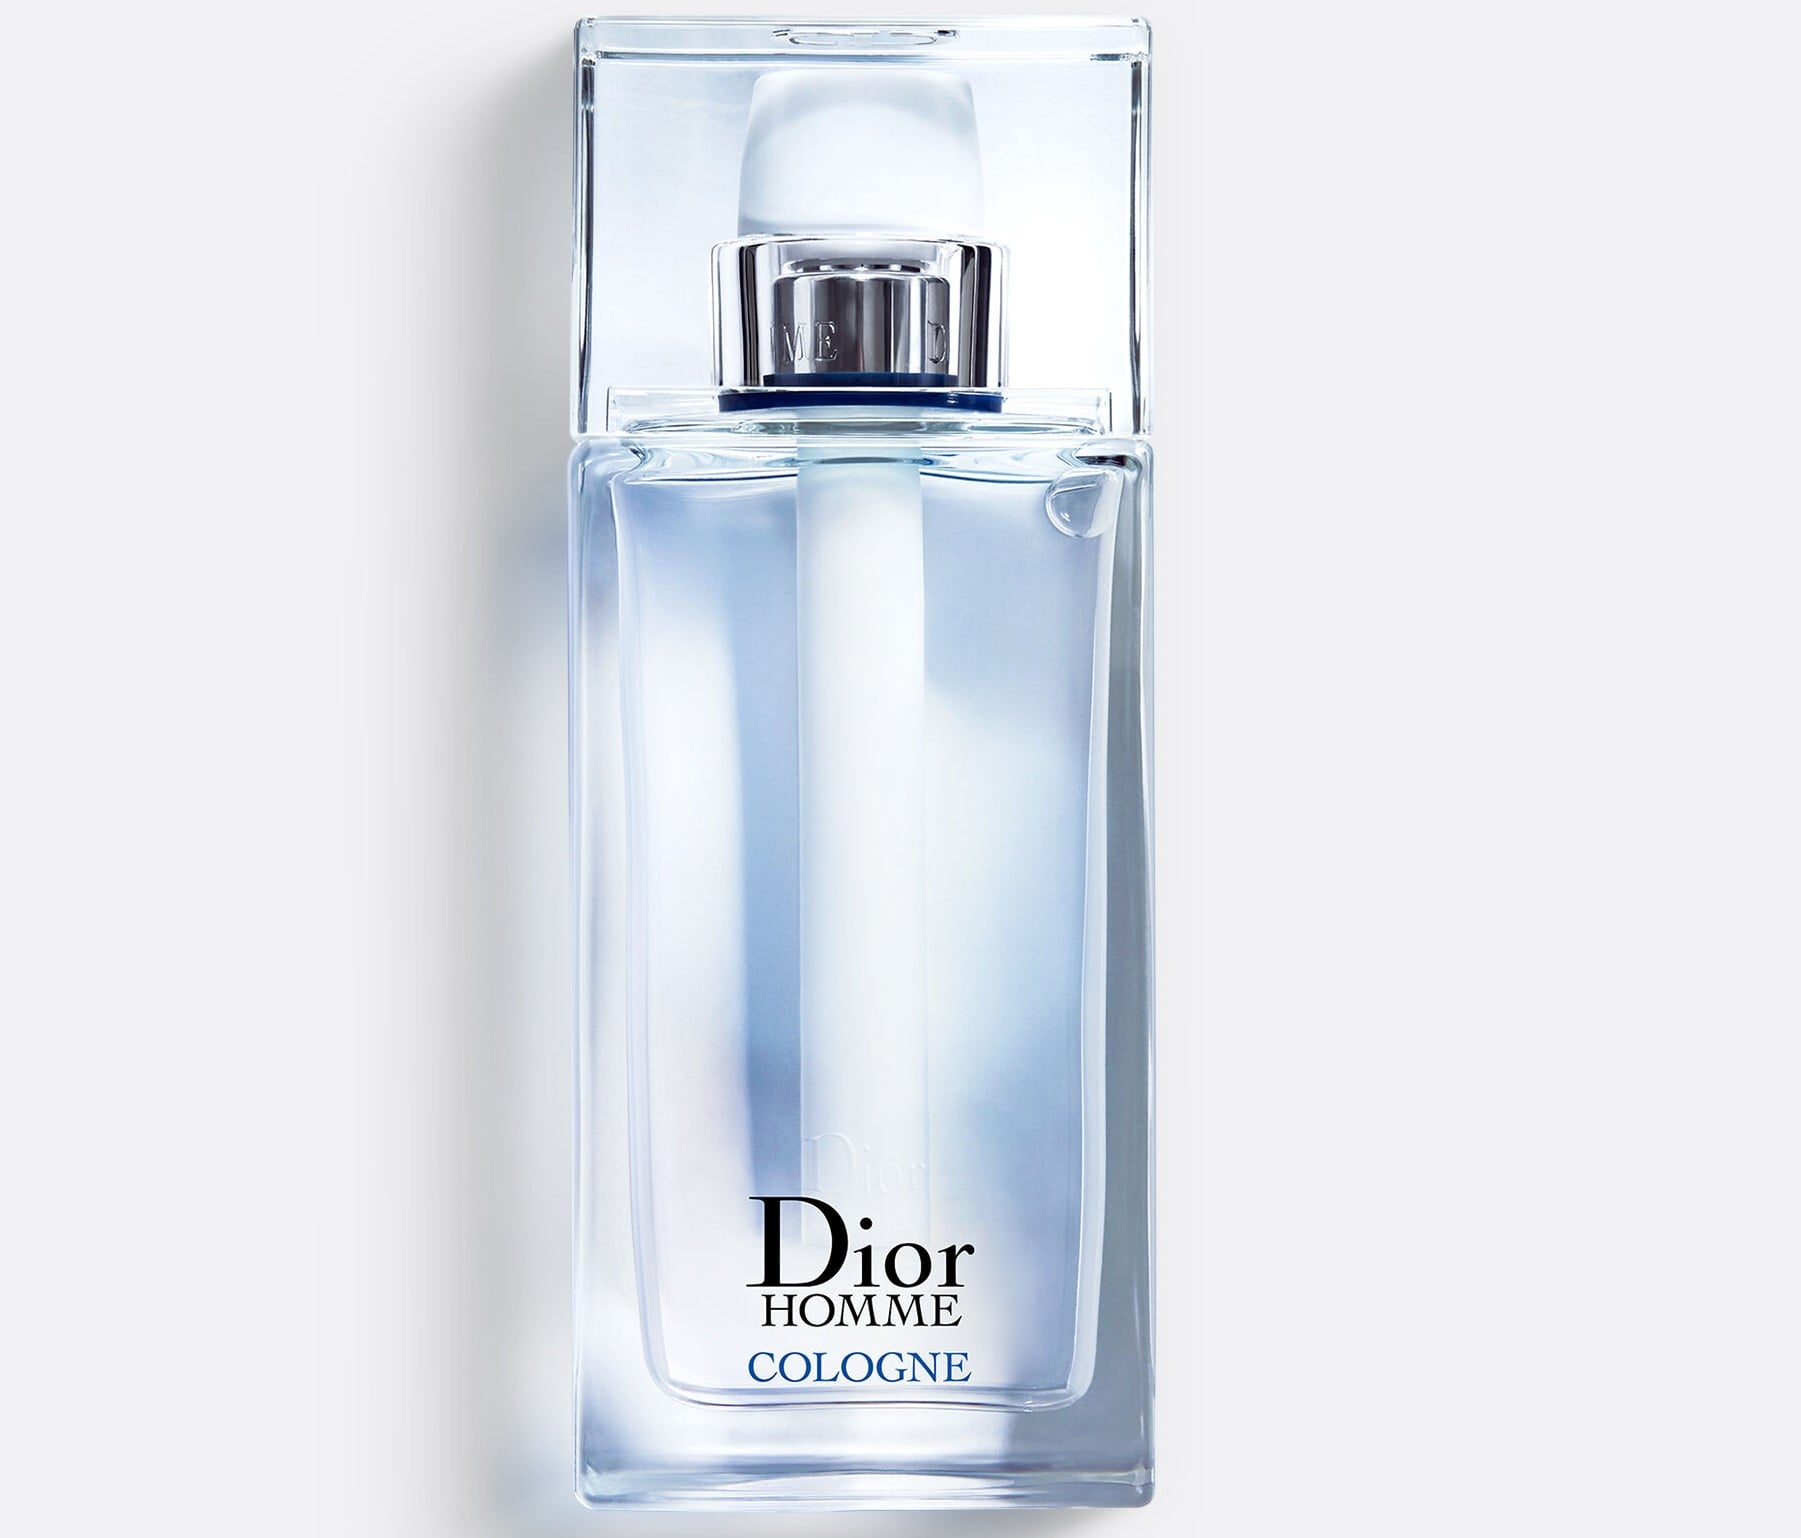 Dior Homme Cologne (Cologne Spray) Perfume for Men by Dior